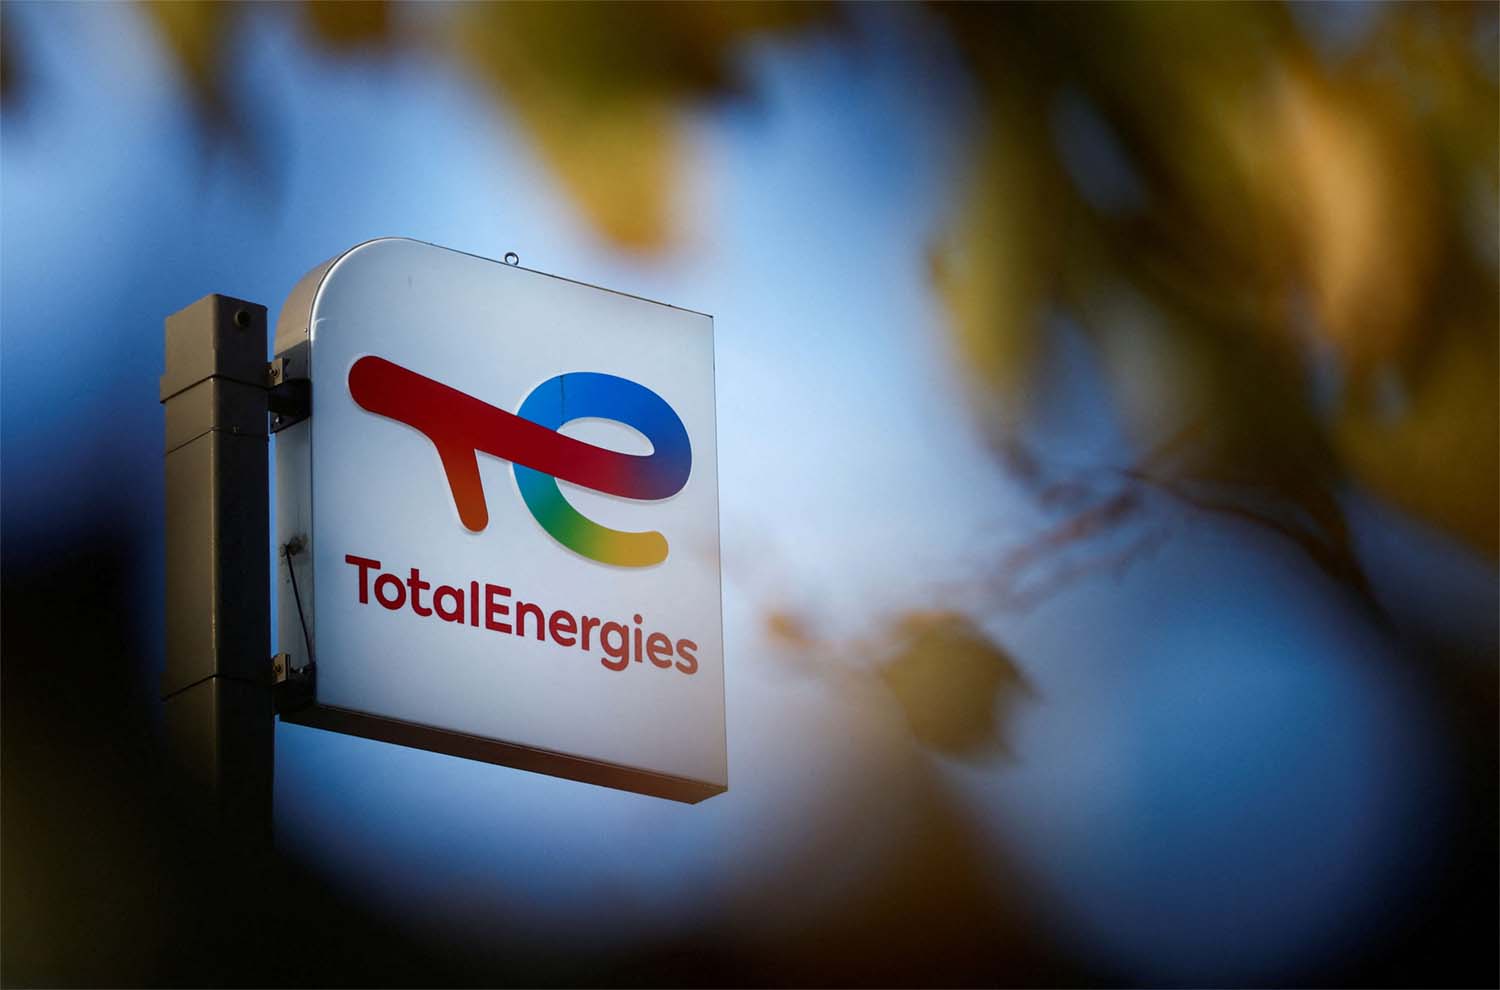 TotalEnergies had pulled staff out of Iraq as it struggles to resolve challenges over the projects